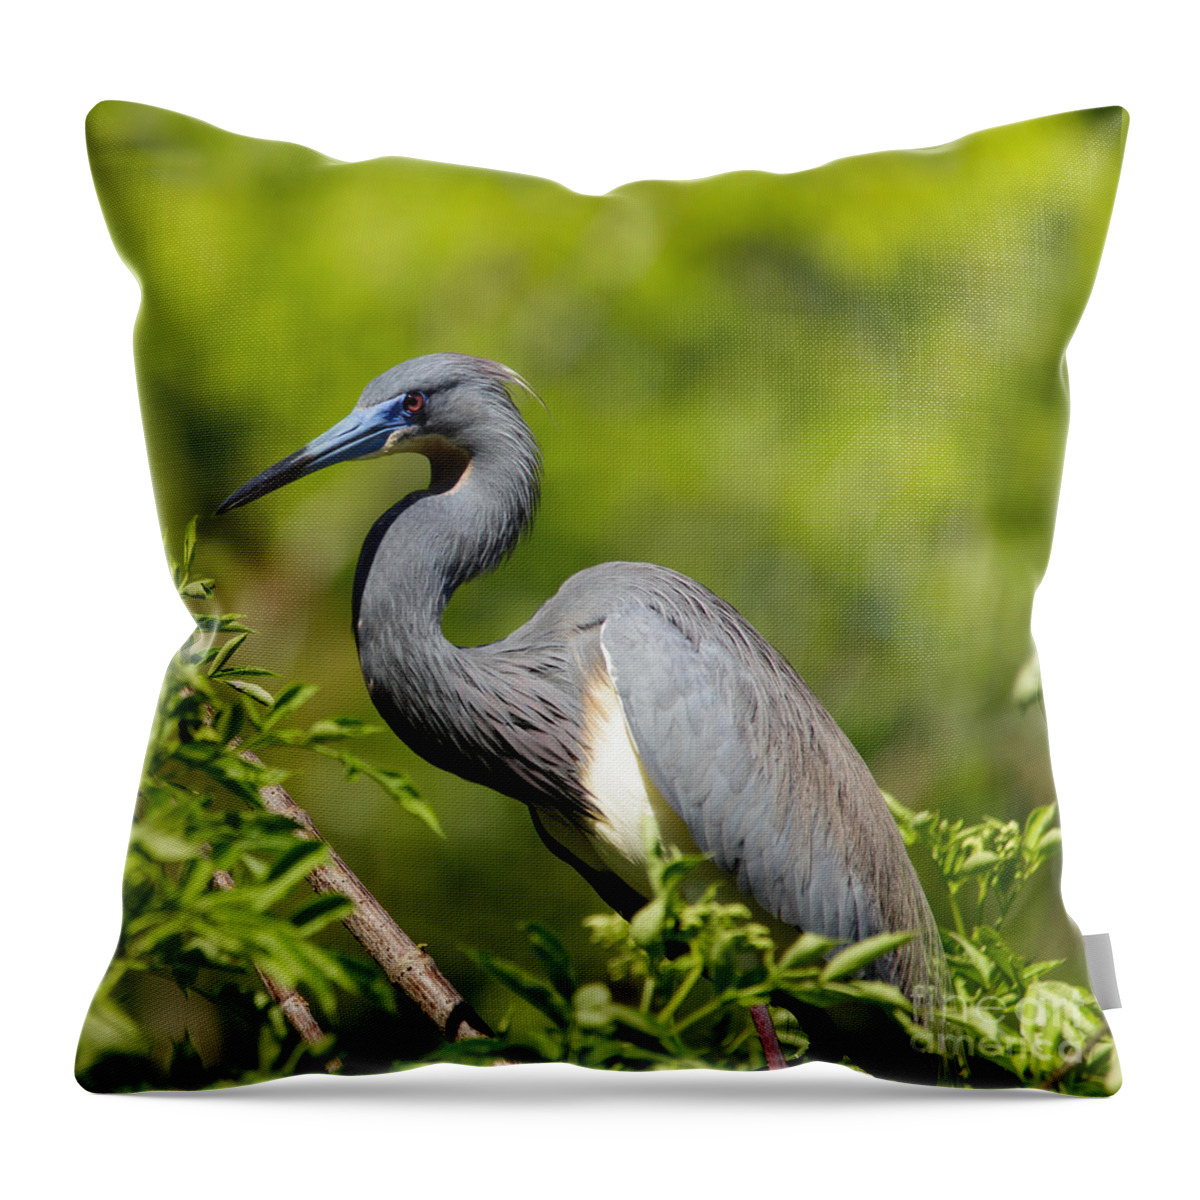 Tricolored Heron Throw Pillow featuring the photograph The Art of Focus by Mary Lou Chmura